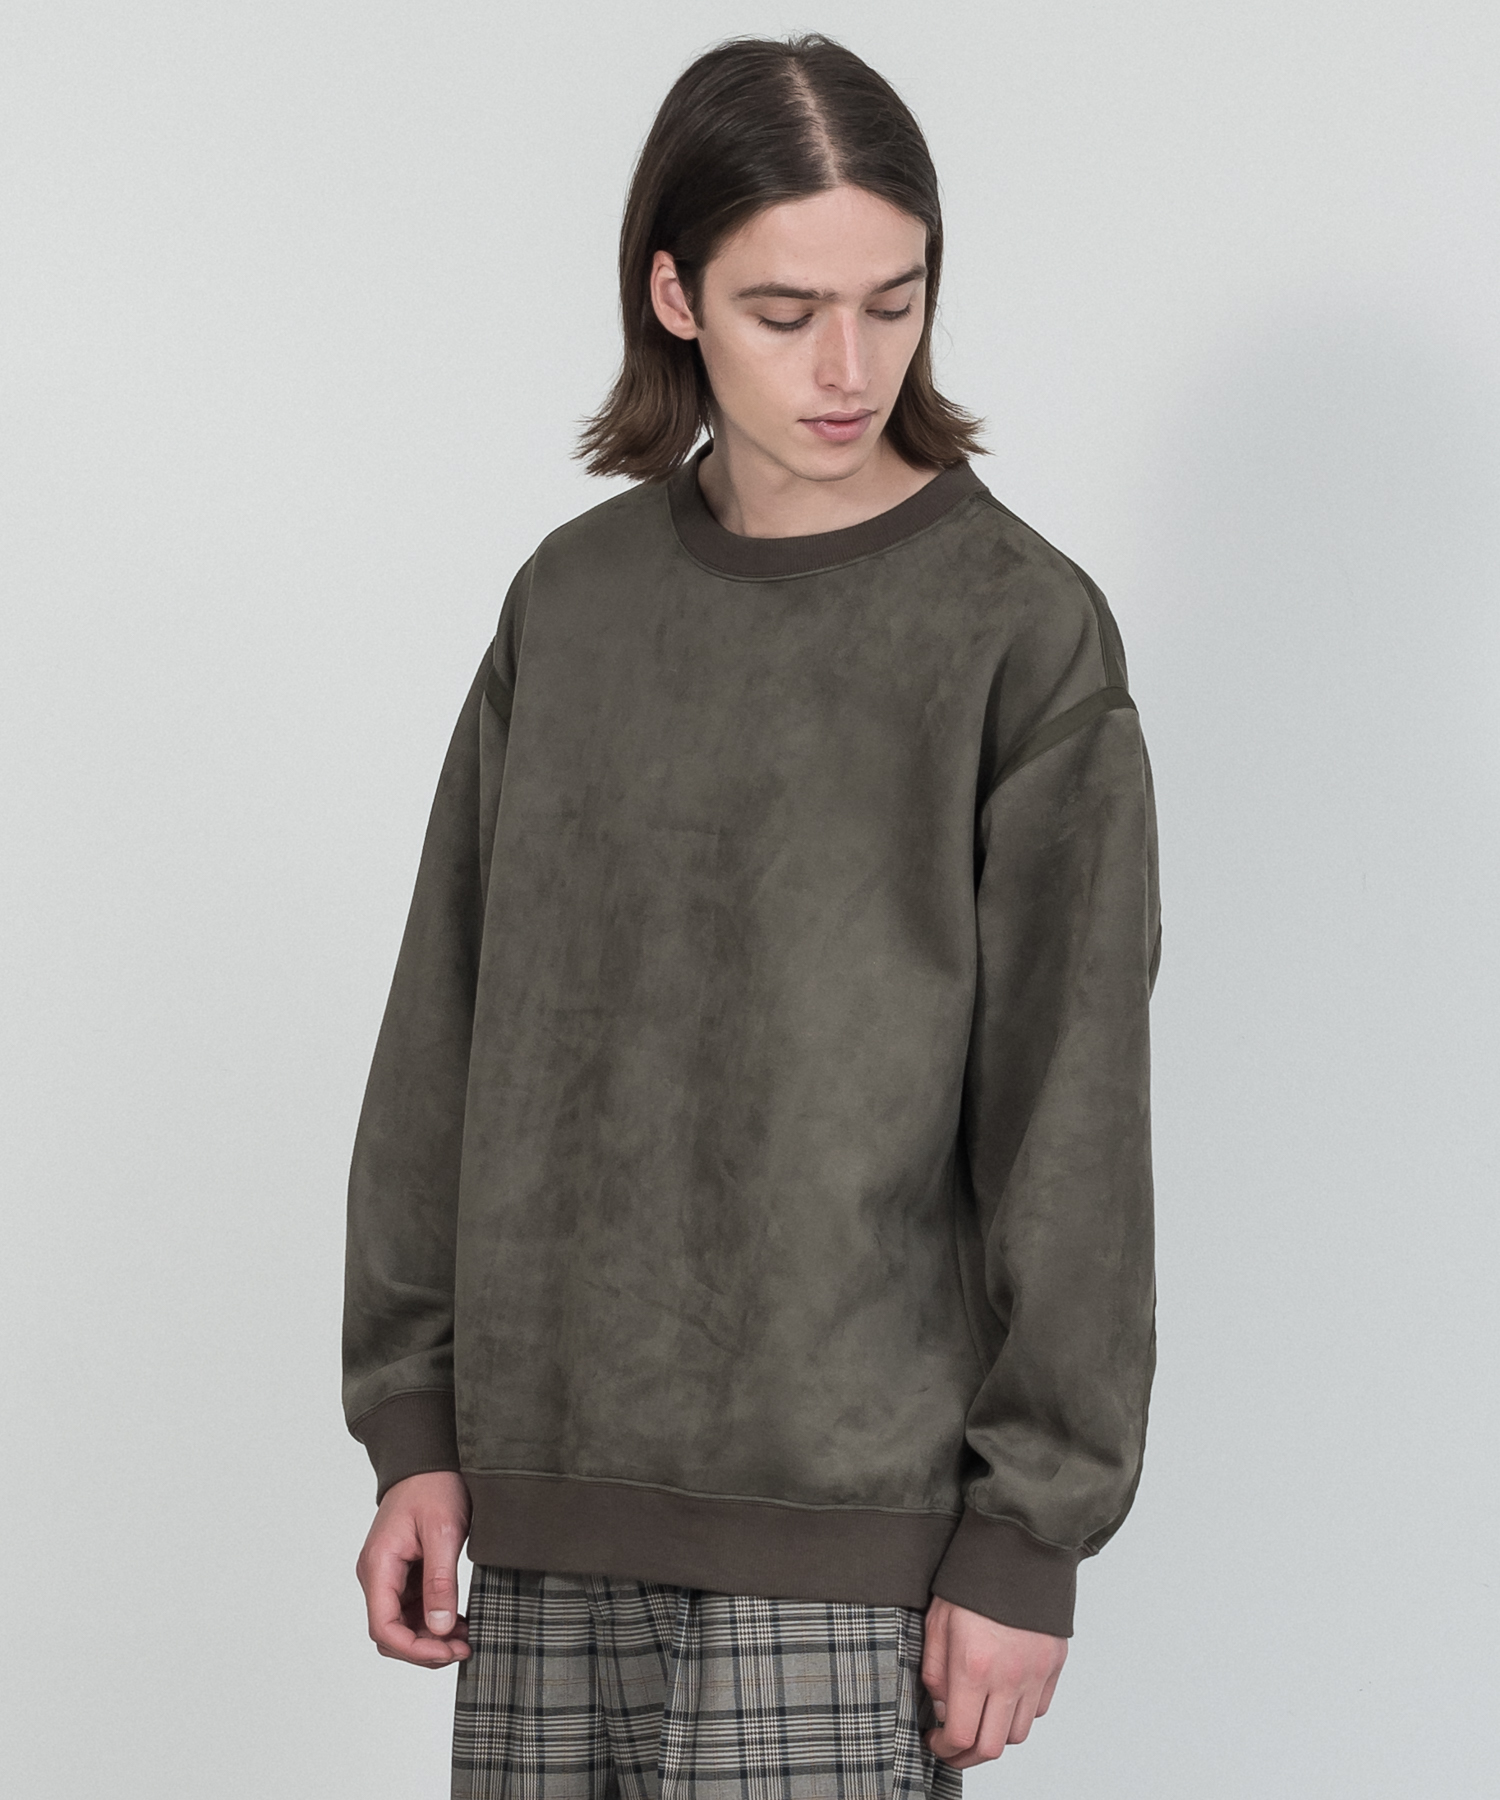 Stretch Faux Suede Piping Pullover - KHAKI